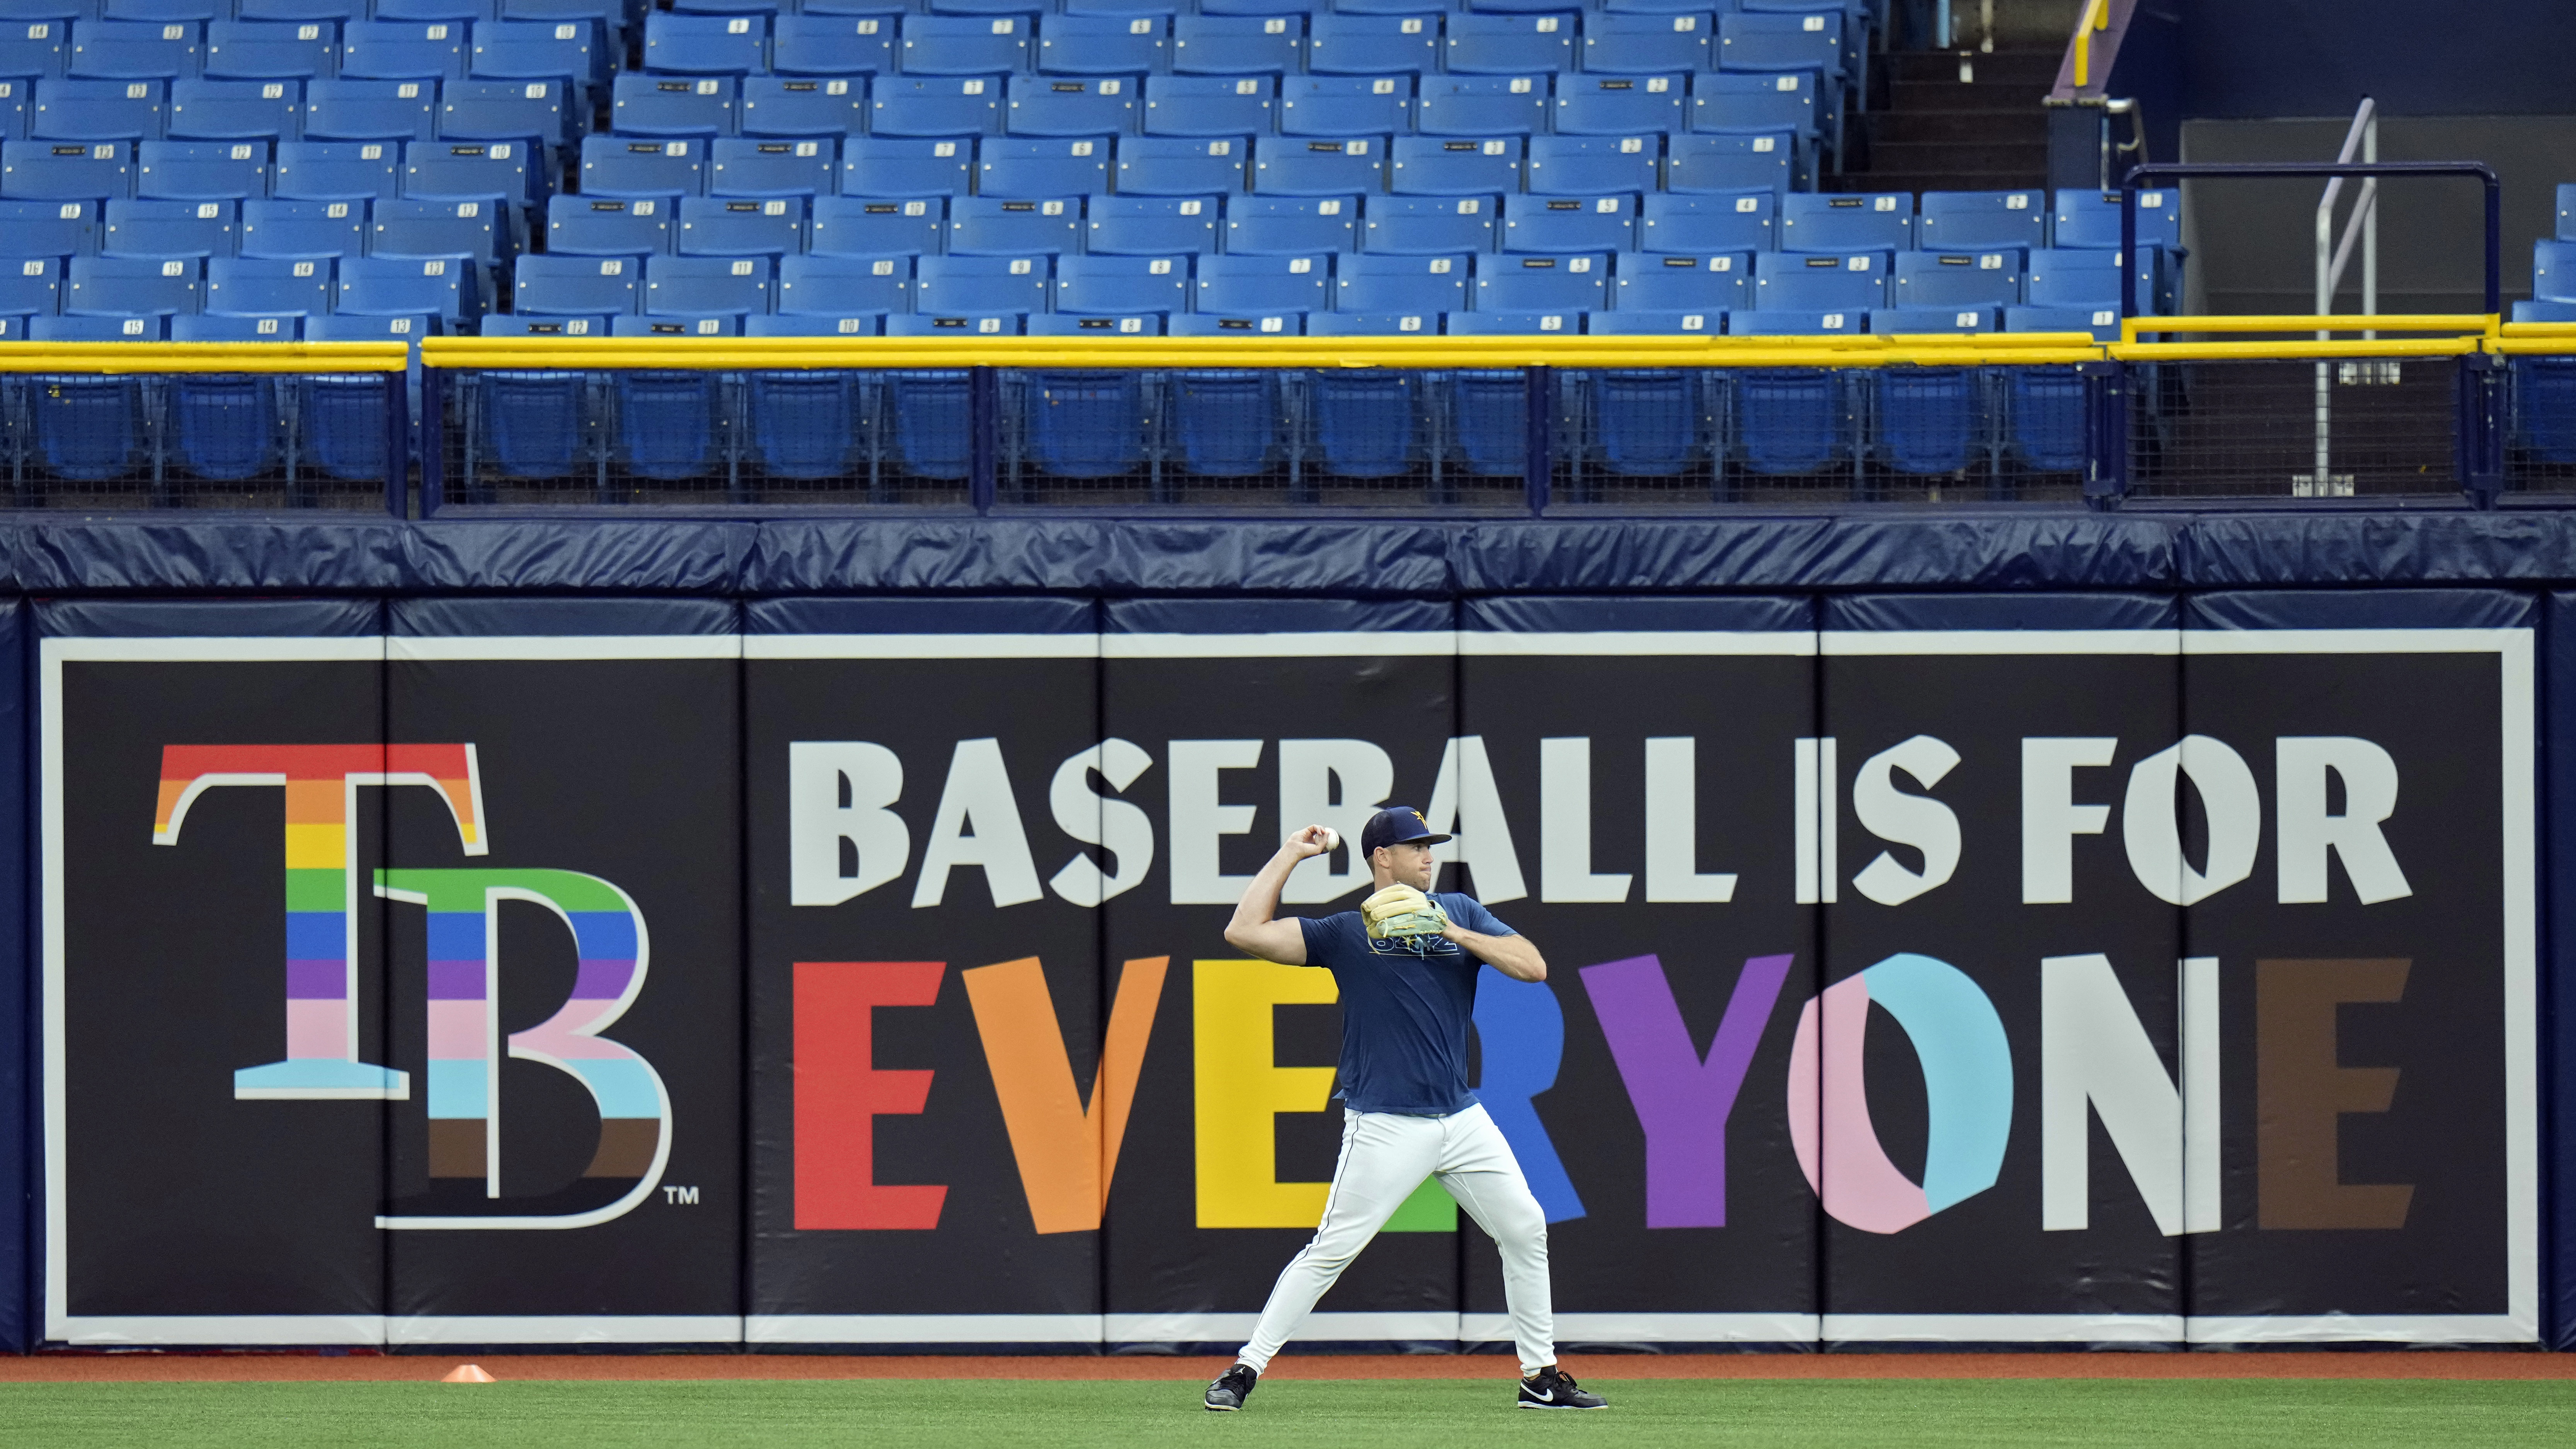 Tampa Bay Baseball Players Refuse To Wear Rainbow For Pride Night